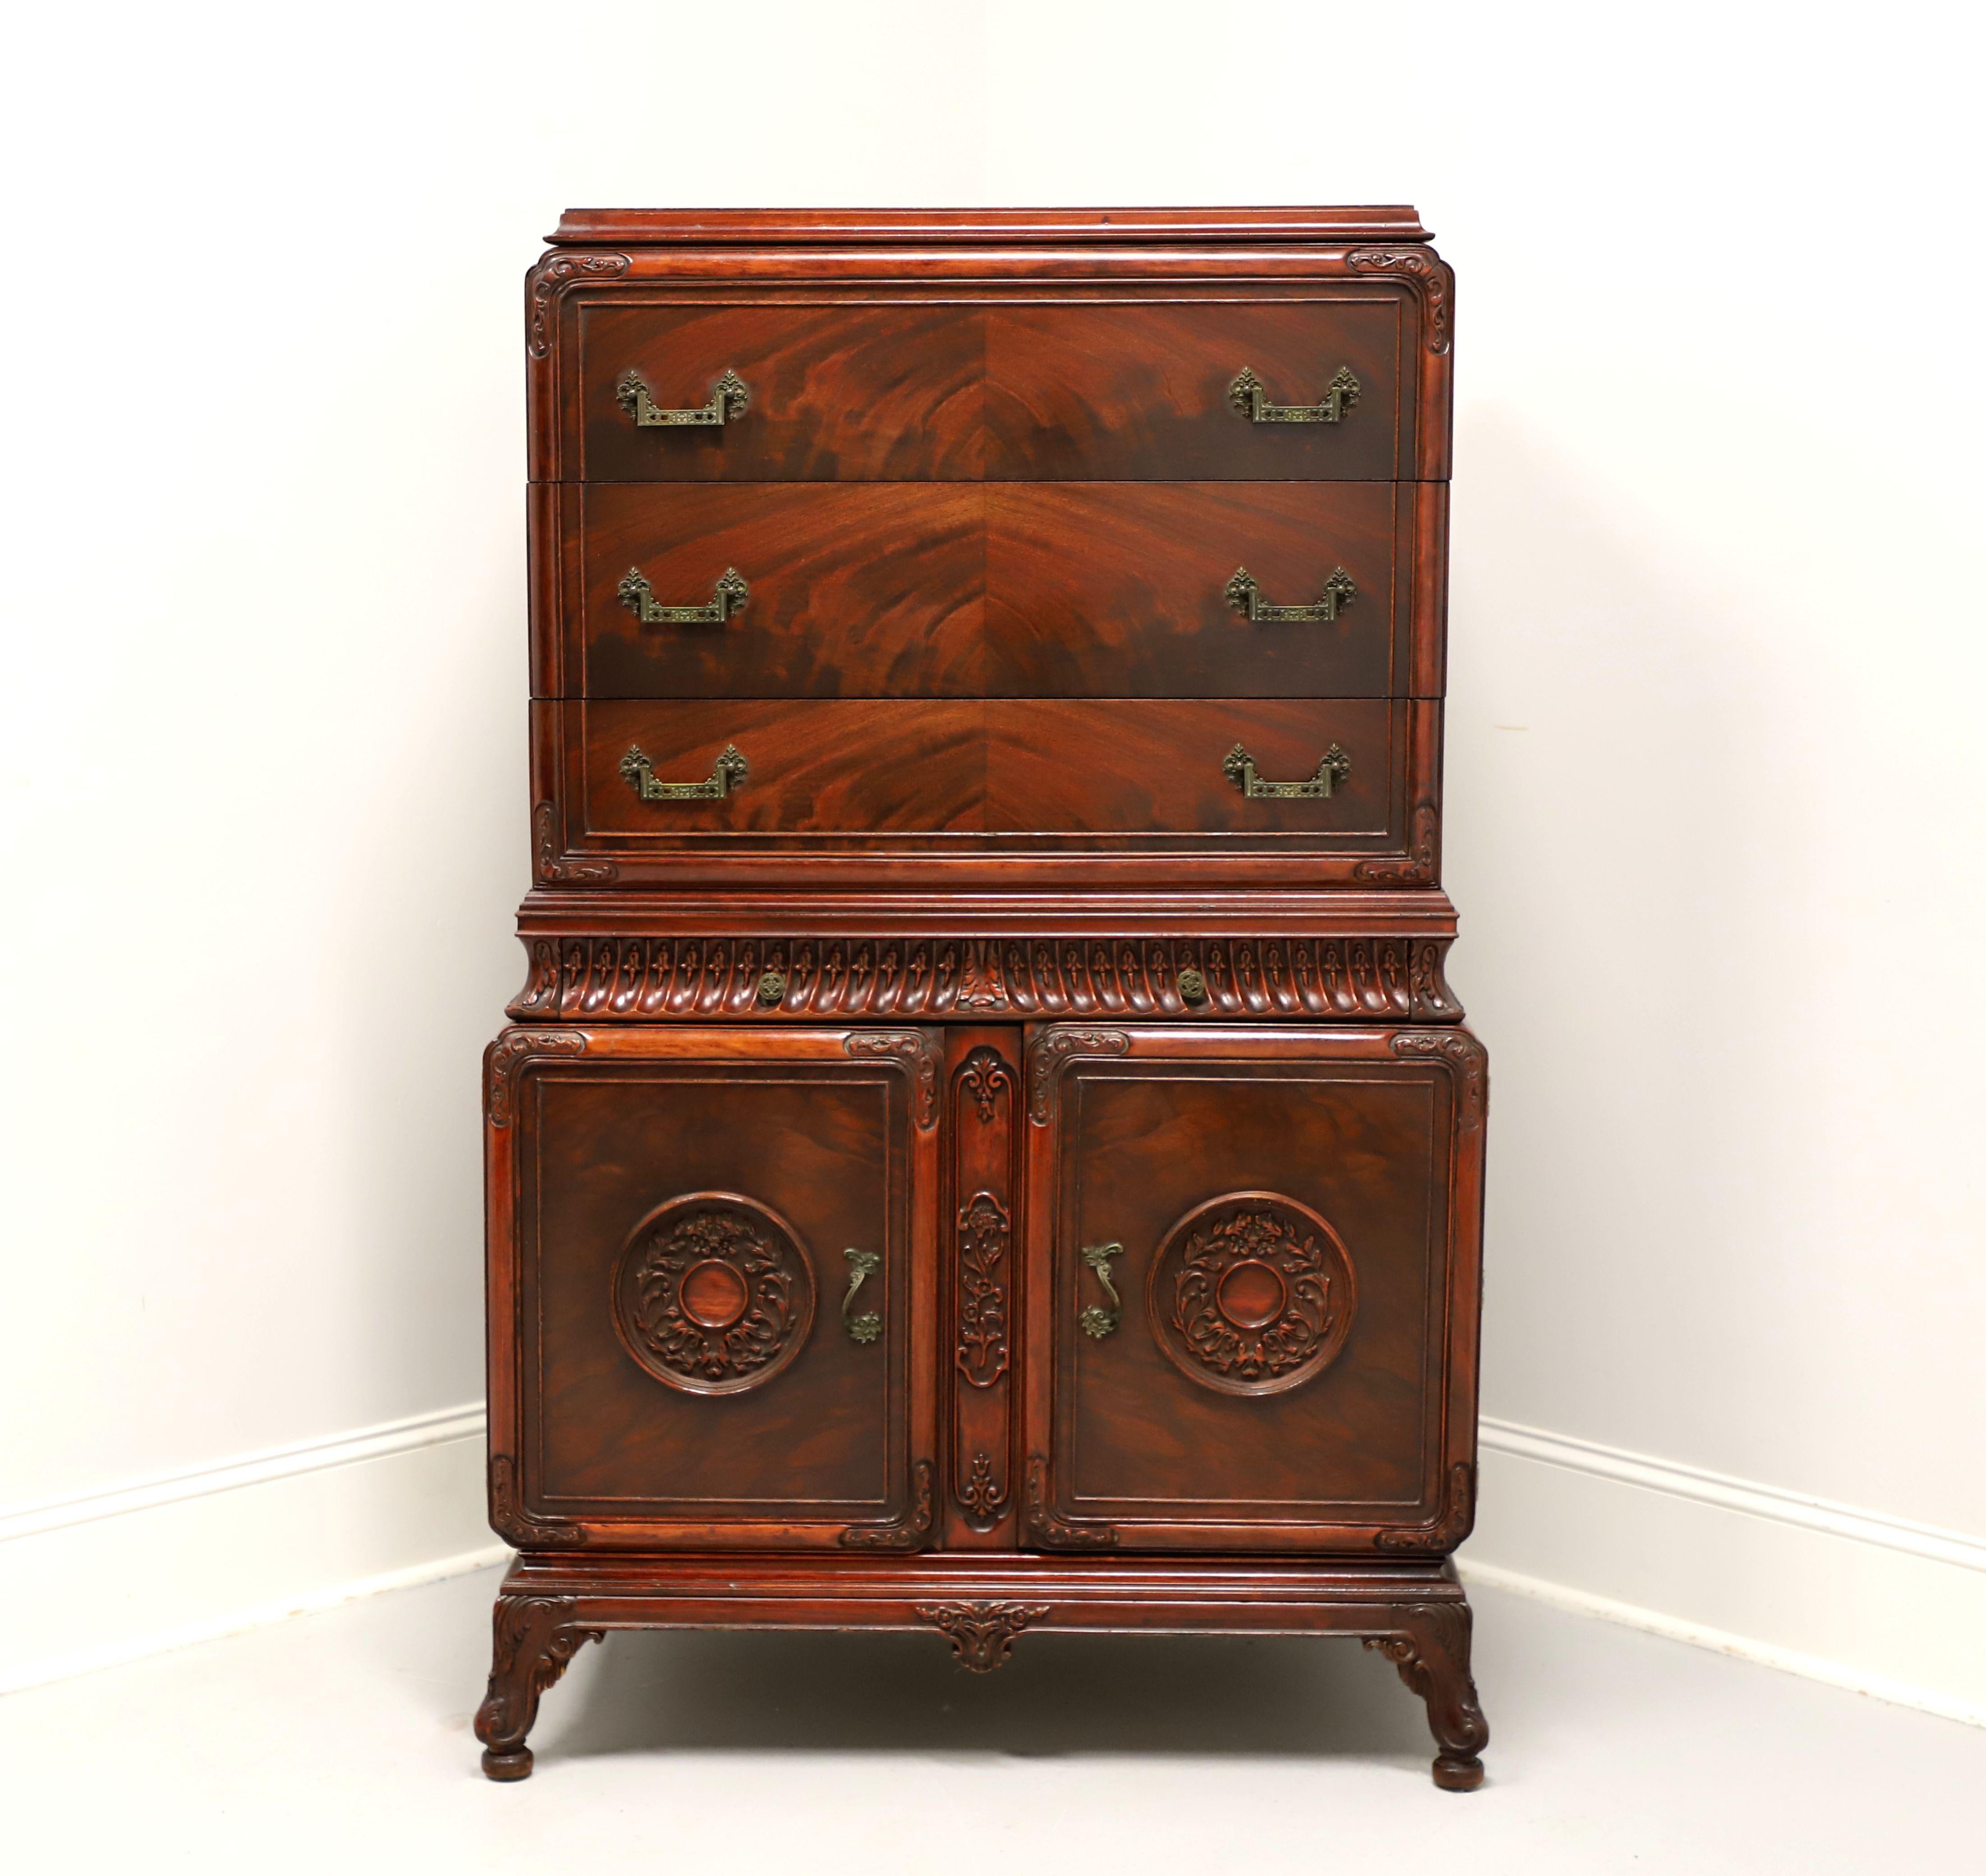 An Asian influenced chest on chest, unbranded, similar quality to Kindel or Rway. Mahogany with flame mahogany upper drawer fronts & top, decorative brass hardware, distinctive Asian styling, intricately carved middle drawer,   Chinoiserie elements